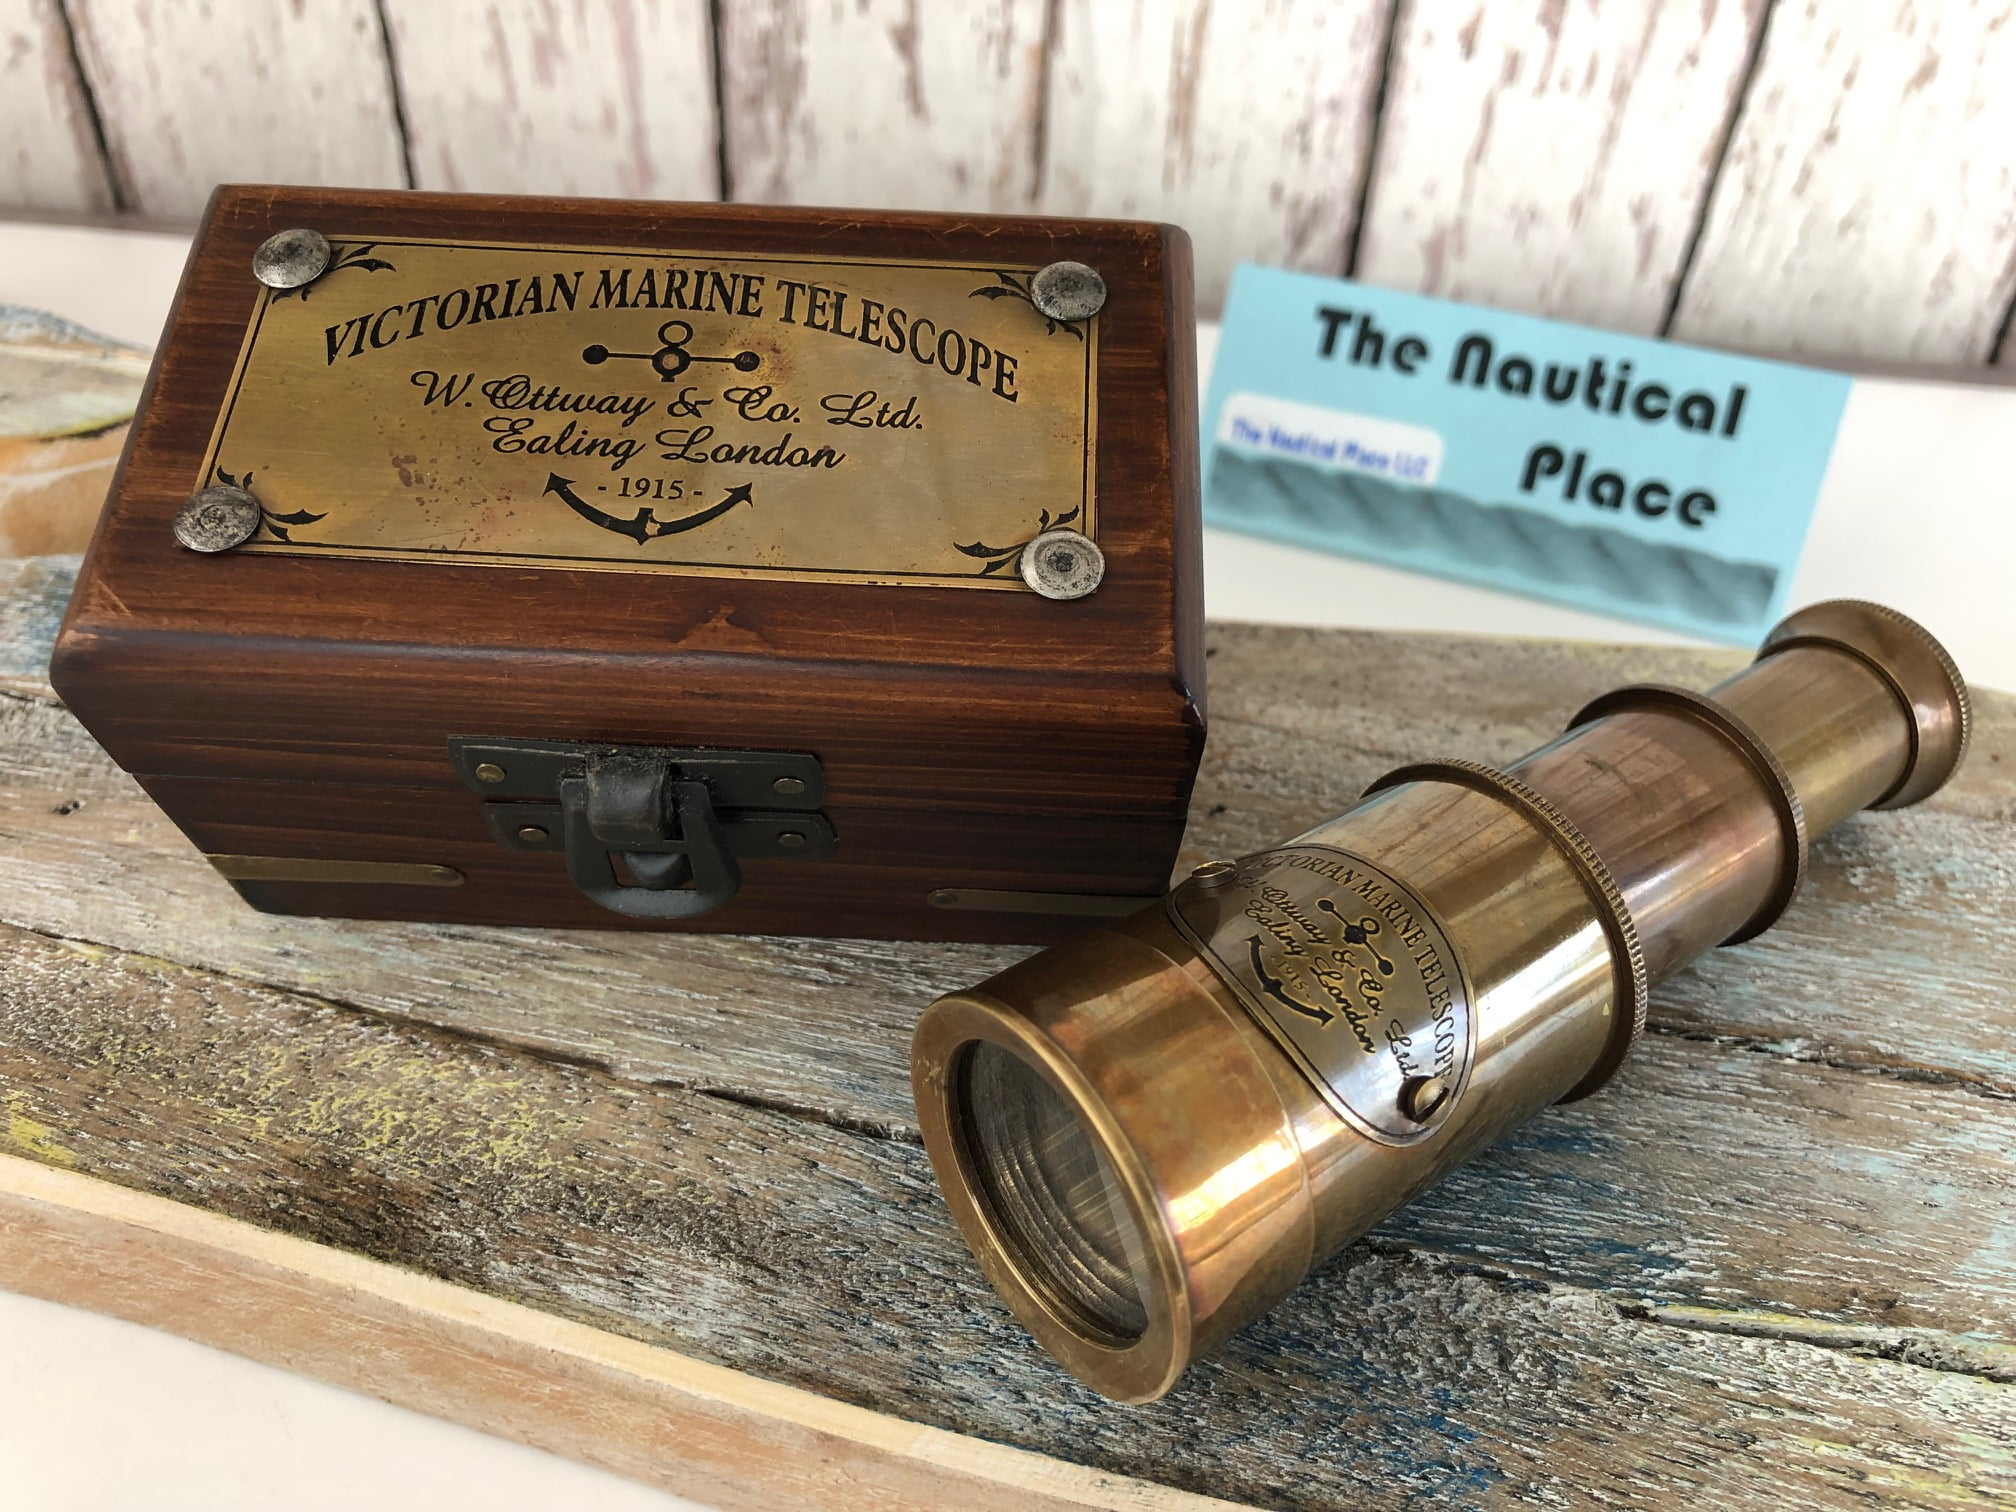 Details about   Vintage brass maritime Victorian marine telescope 9" spyglass with wooden box 